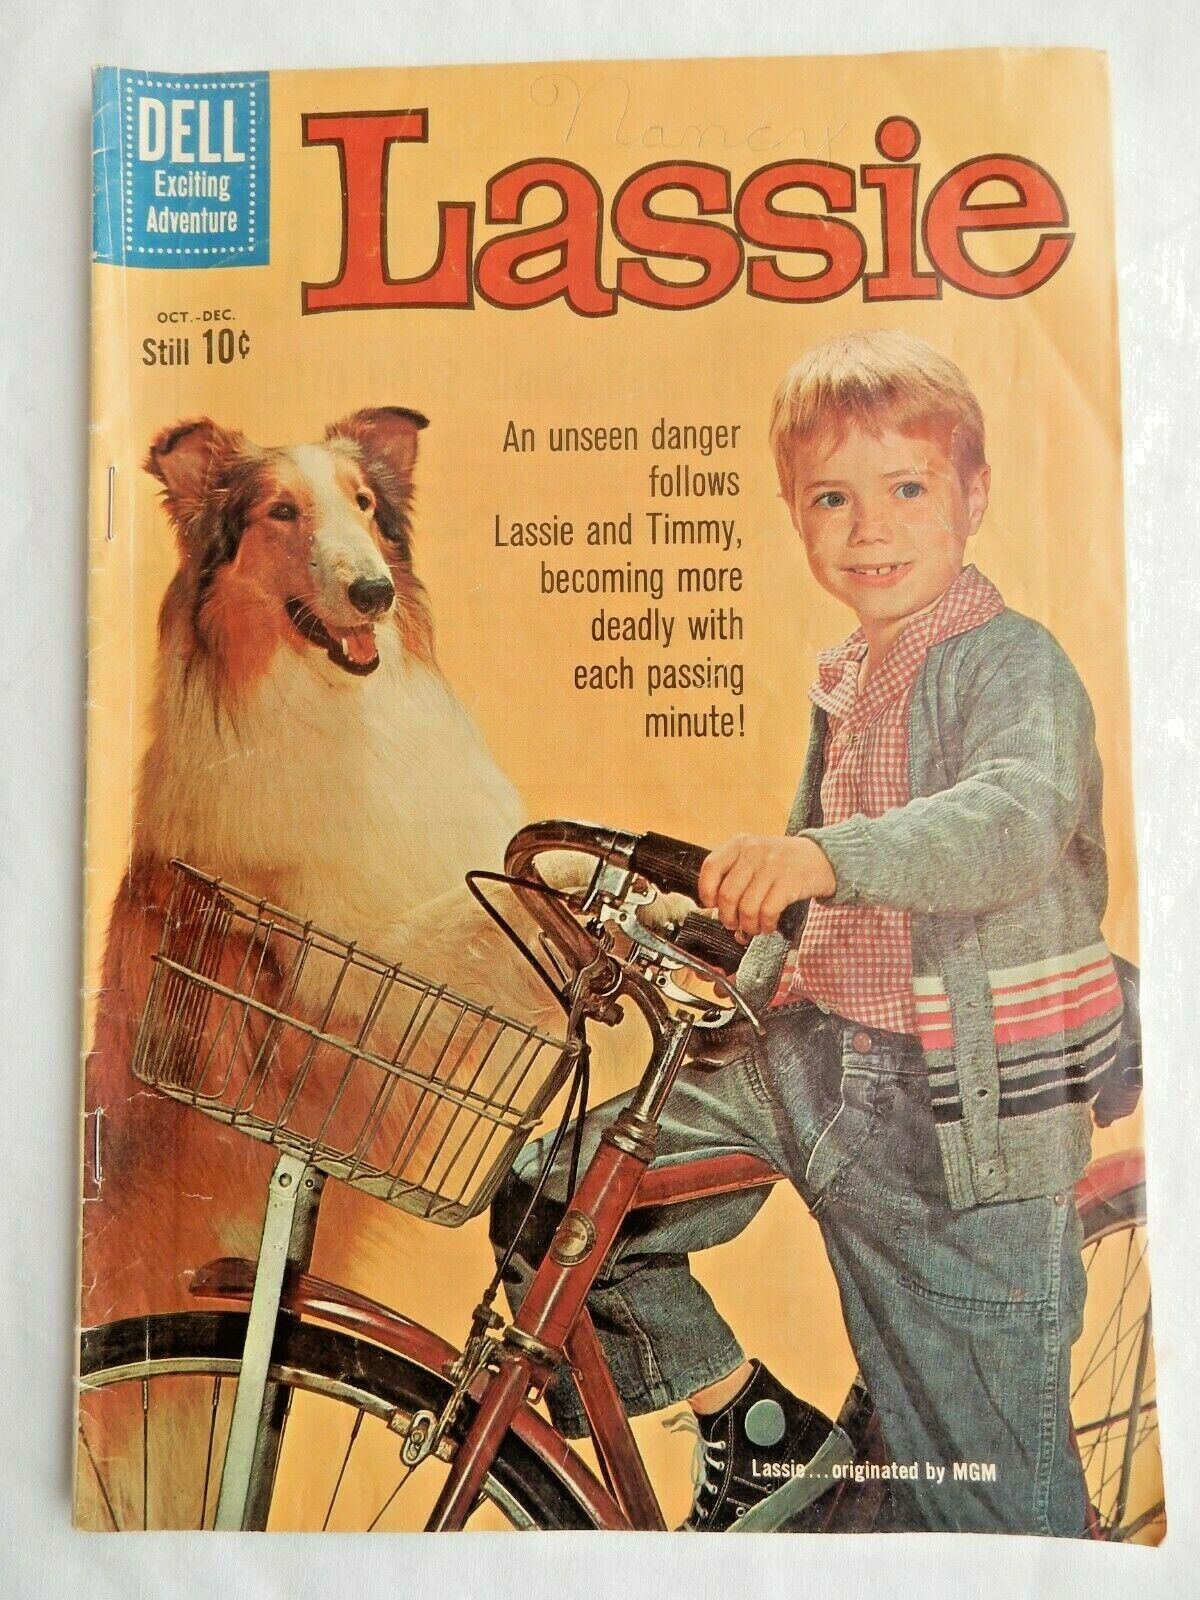 Lassie-Volume 1, Number #51, Oct.-Dec.1960-Dell Comic-MGM TV Show-Good Condition